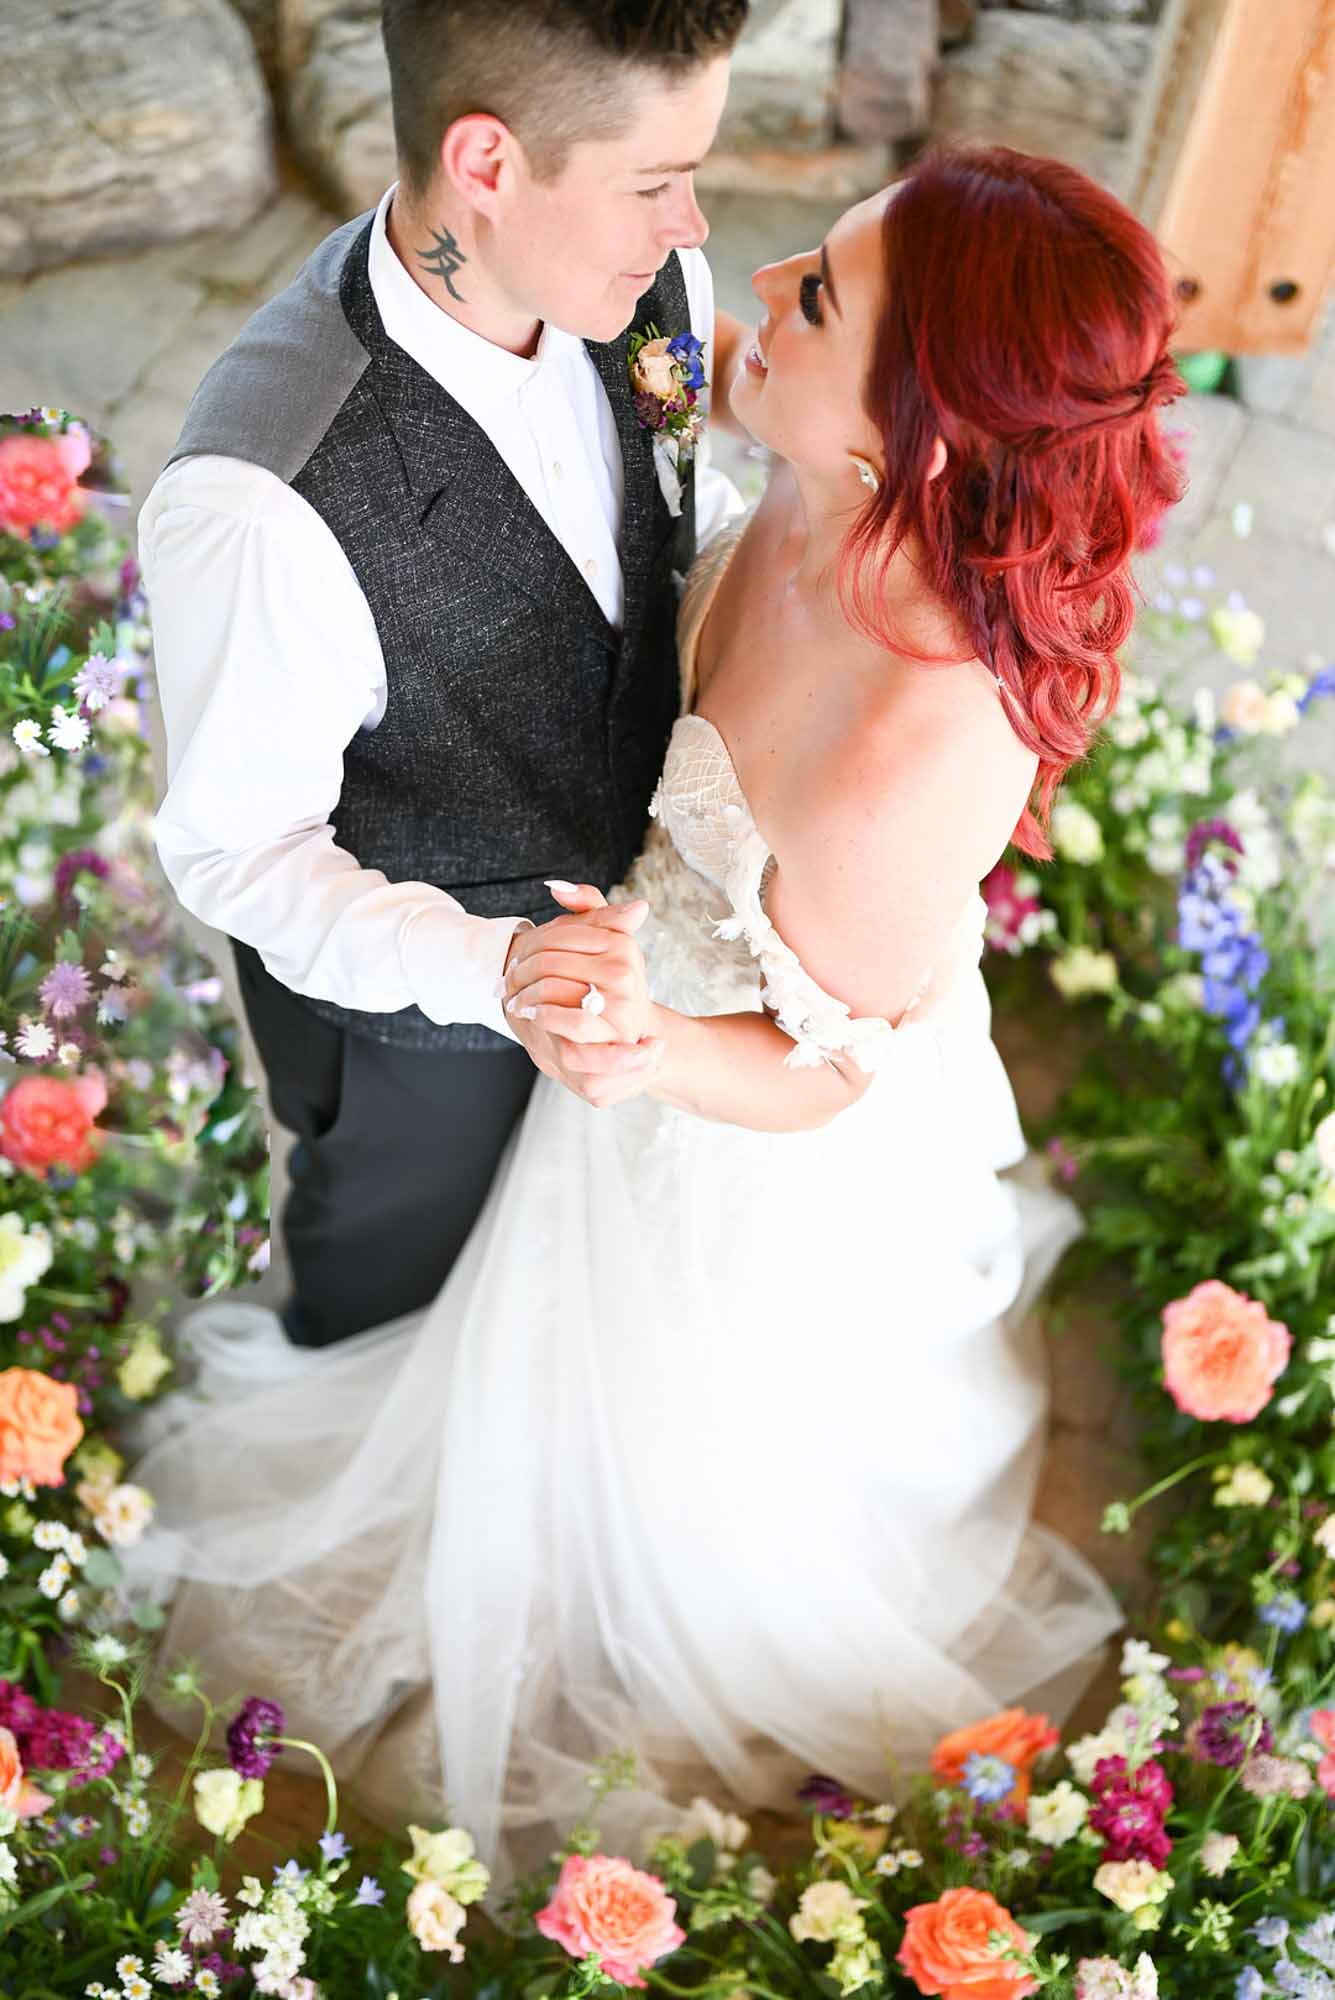 Colorful wedding inspiration from an enchanting world of wildflowers | Nadine McKenney Photography | Featured on Equally Wed, the leading LGBTQ+ wedding magazine